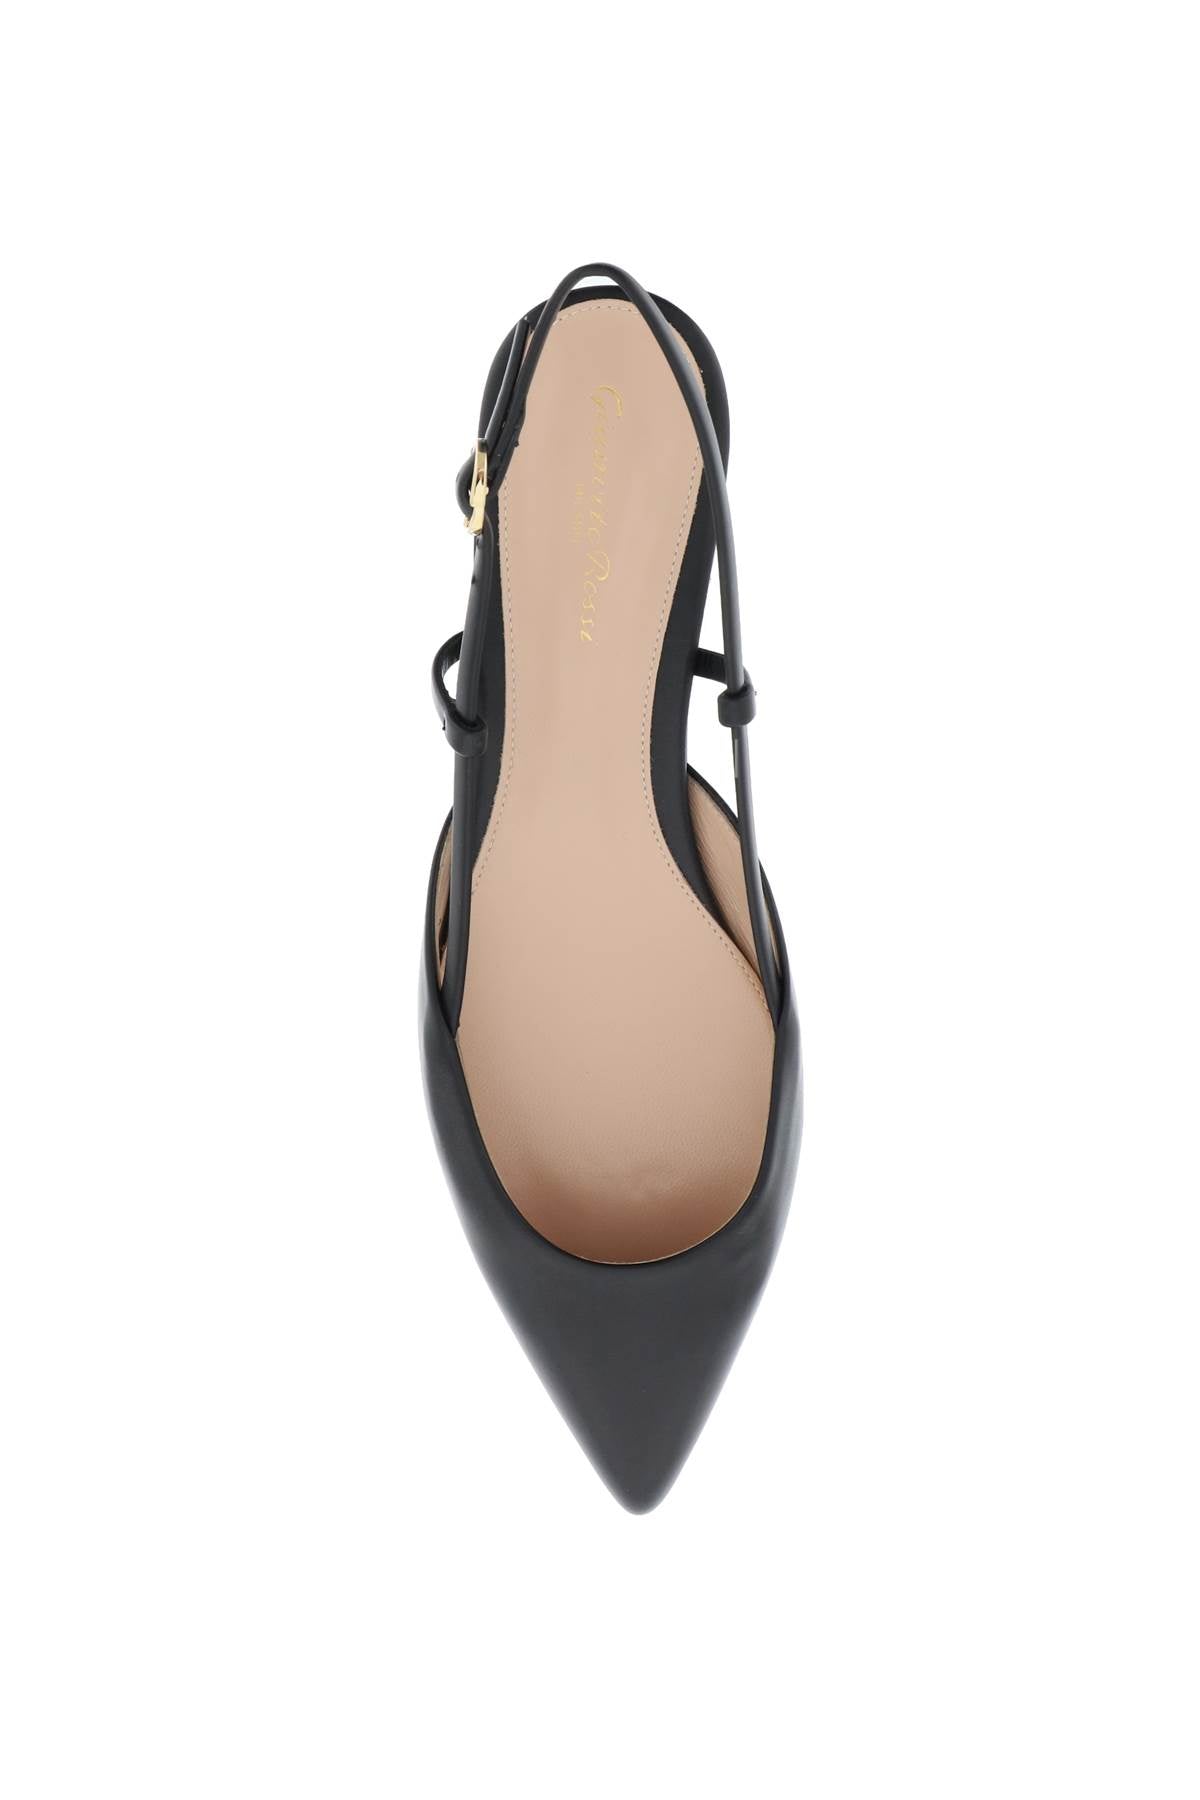 GIANVITO ROSSI Sleek and Chic: Black Slingback Ballet Flats for Women